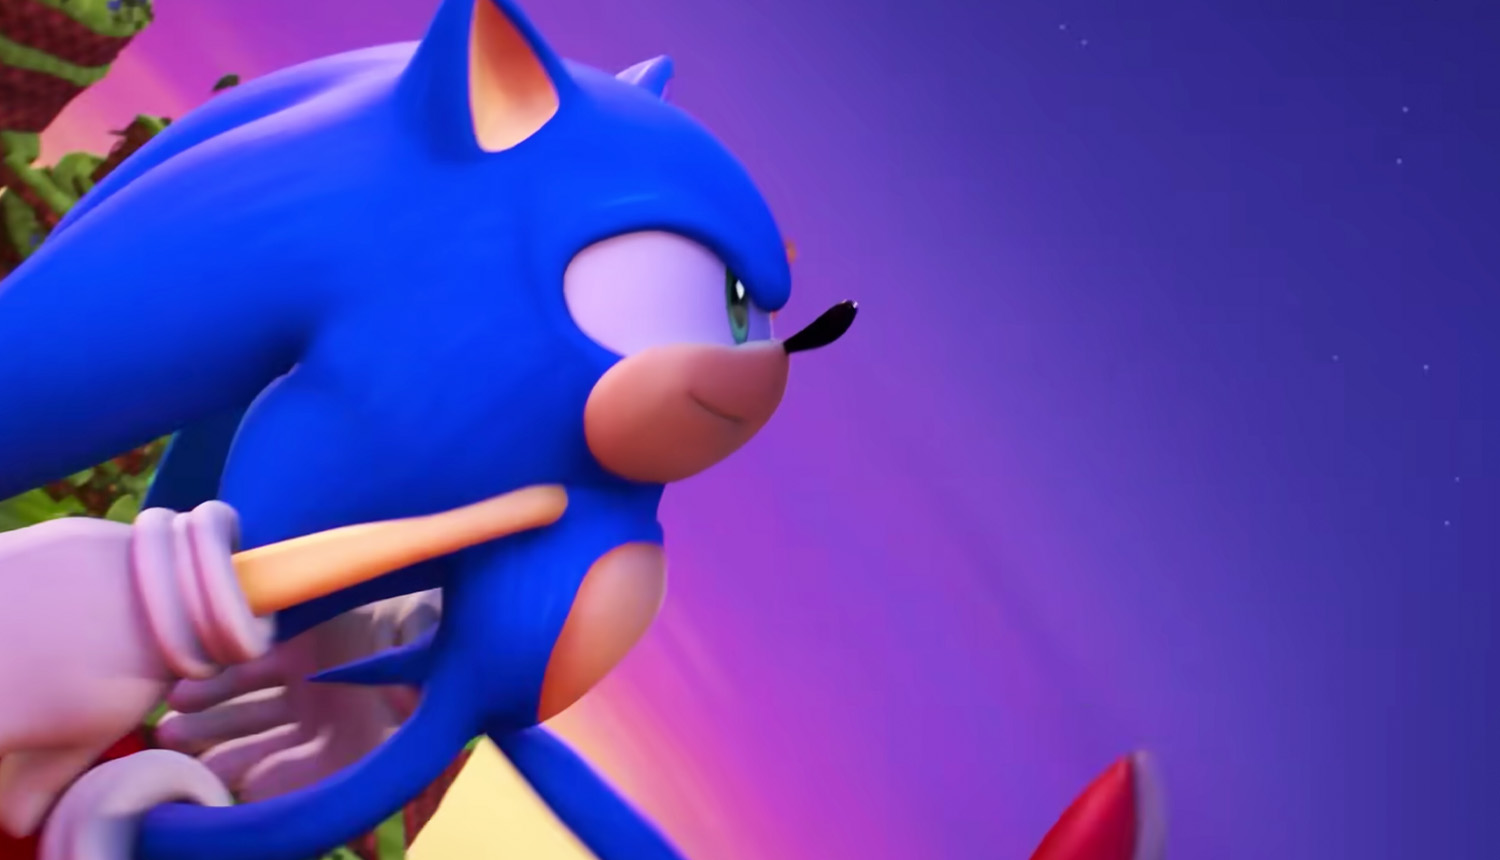 IGN on X: Sonic Prime's second season proves to be an engaging and, in  some aspects, improved follow-up to the hit family-friendly animated show.  Our review:   / X